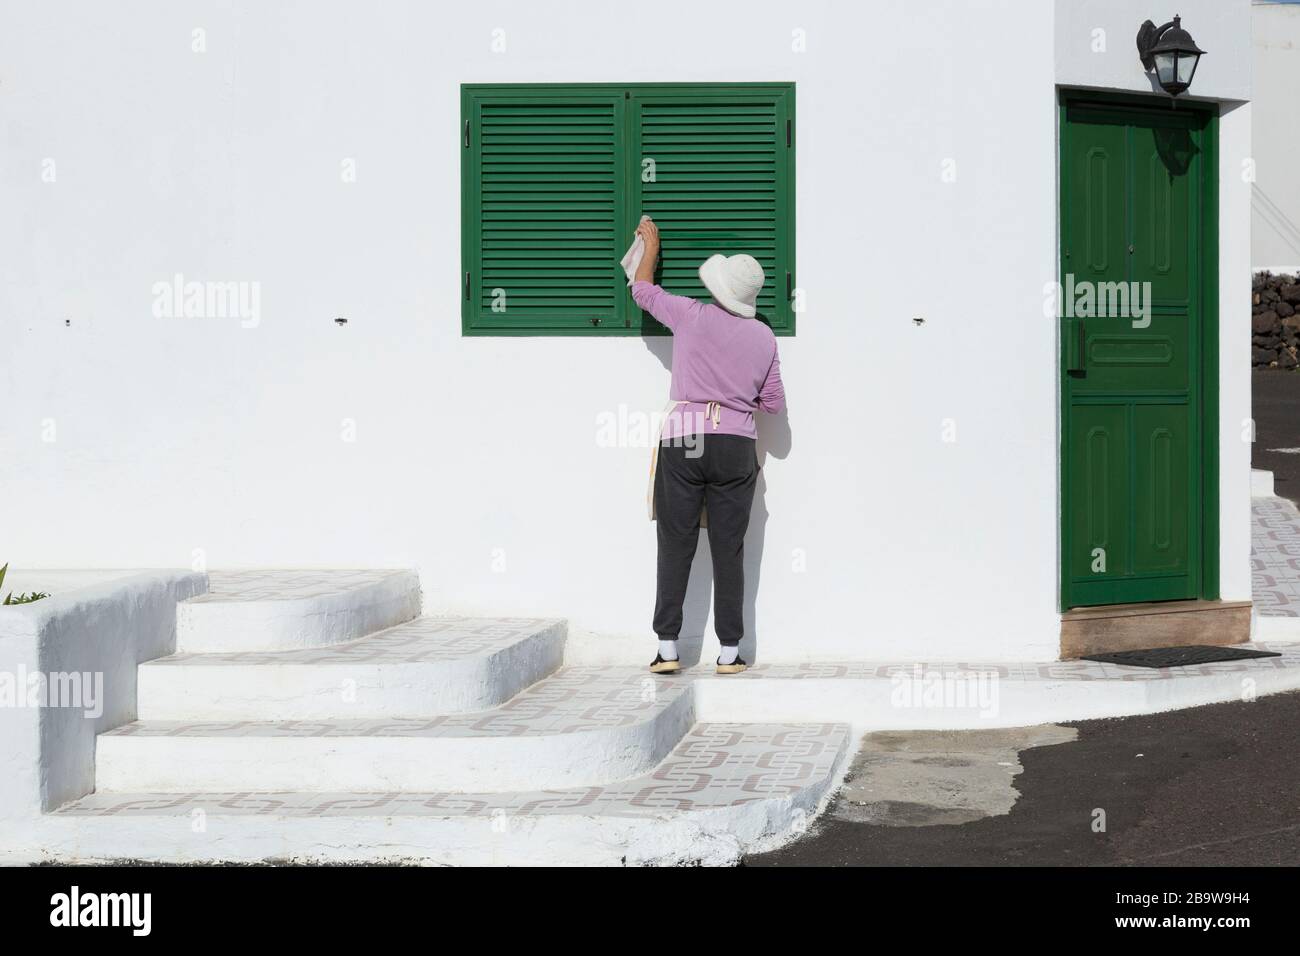 A woman cleaning the window shutters of a whitewashed house in Uga, Lanzarote, Canary Islands, Spain Stock Photo